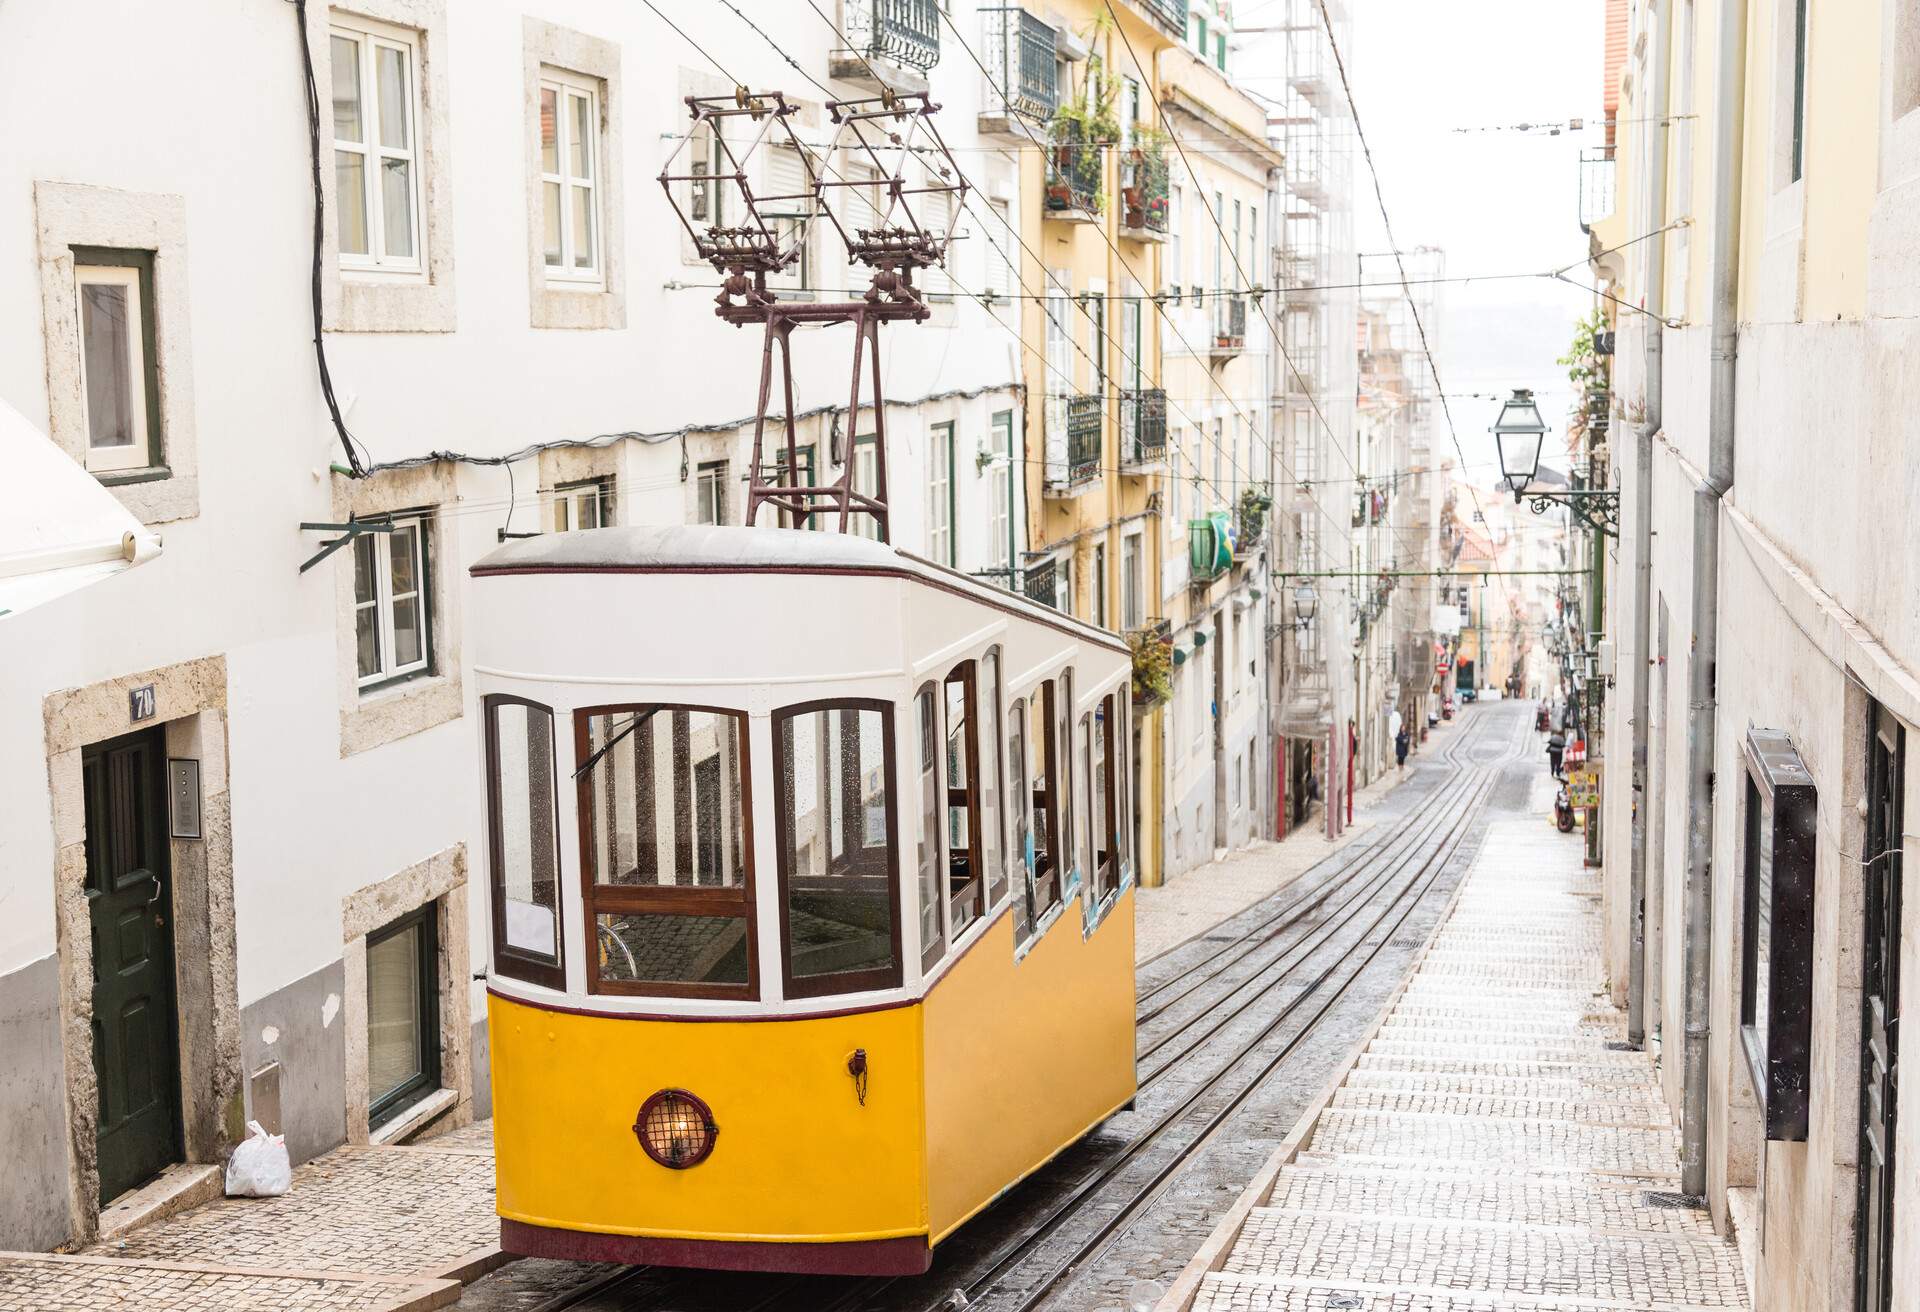 Typical yellow old tram funicular Elevador da Bica in Bairro Alto, going up hill in the old town of Lisbon